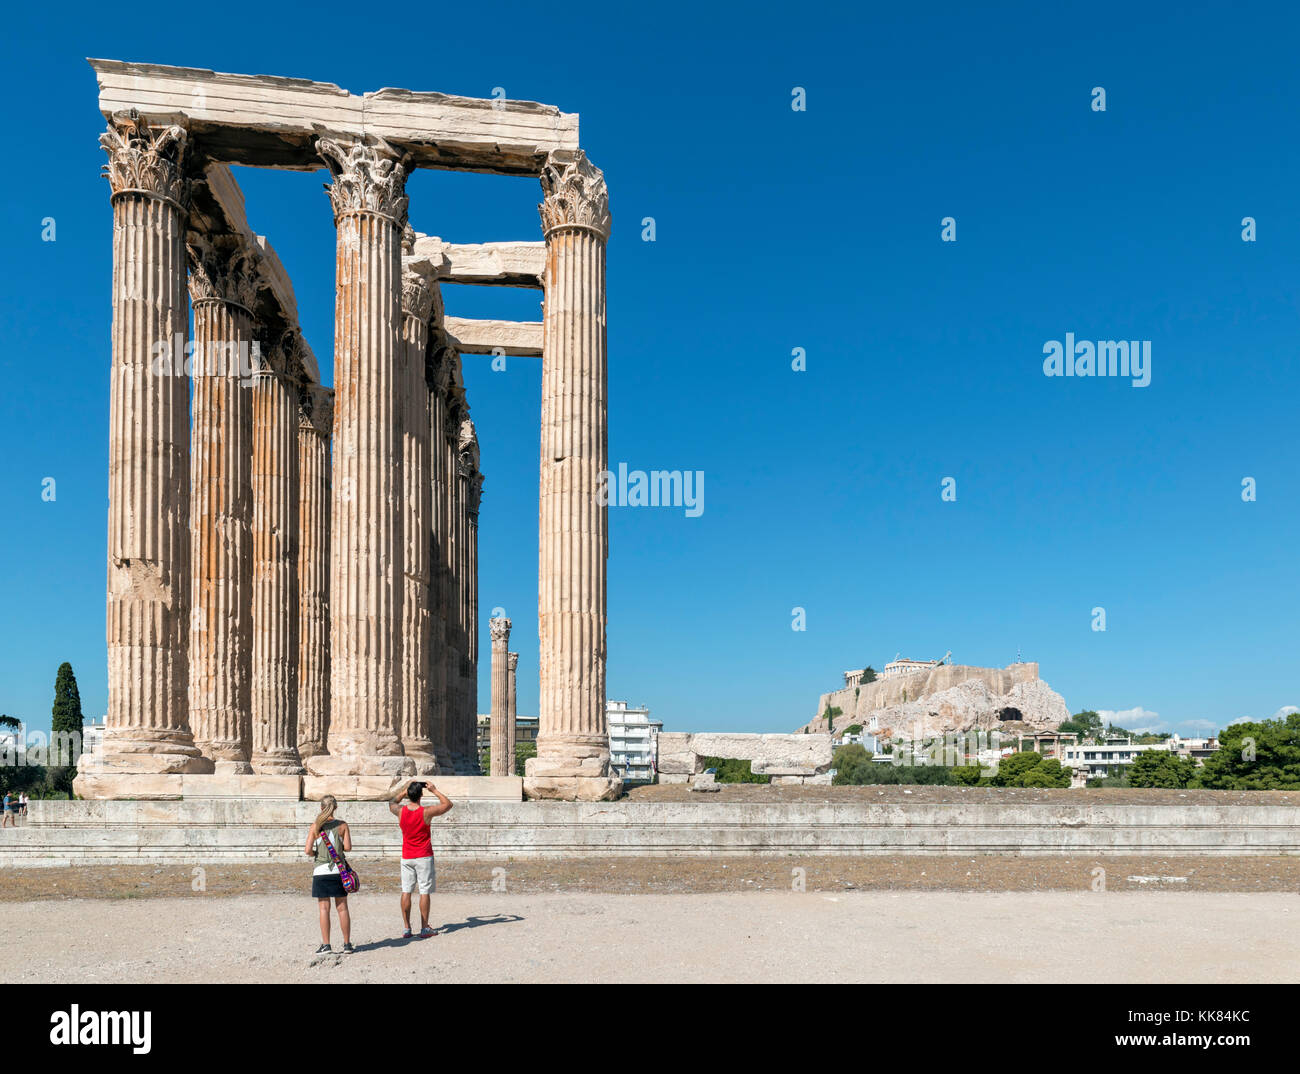 Couple in front of the Temple of Olympian Zeus (Olympeion) with the Acropolis in the background, Athens, Greece Stock Photo